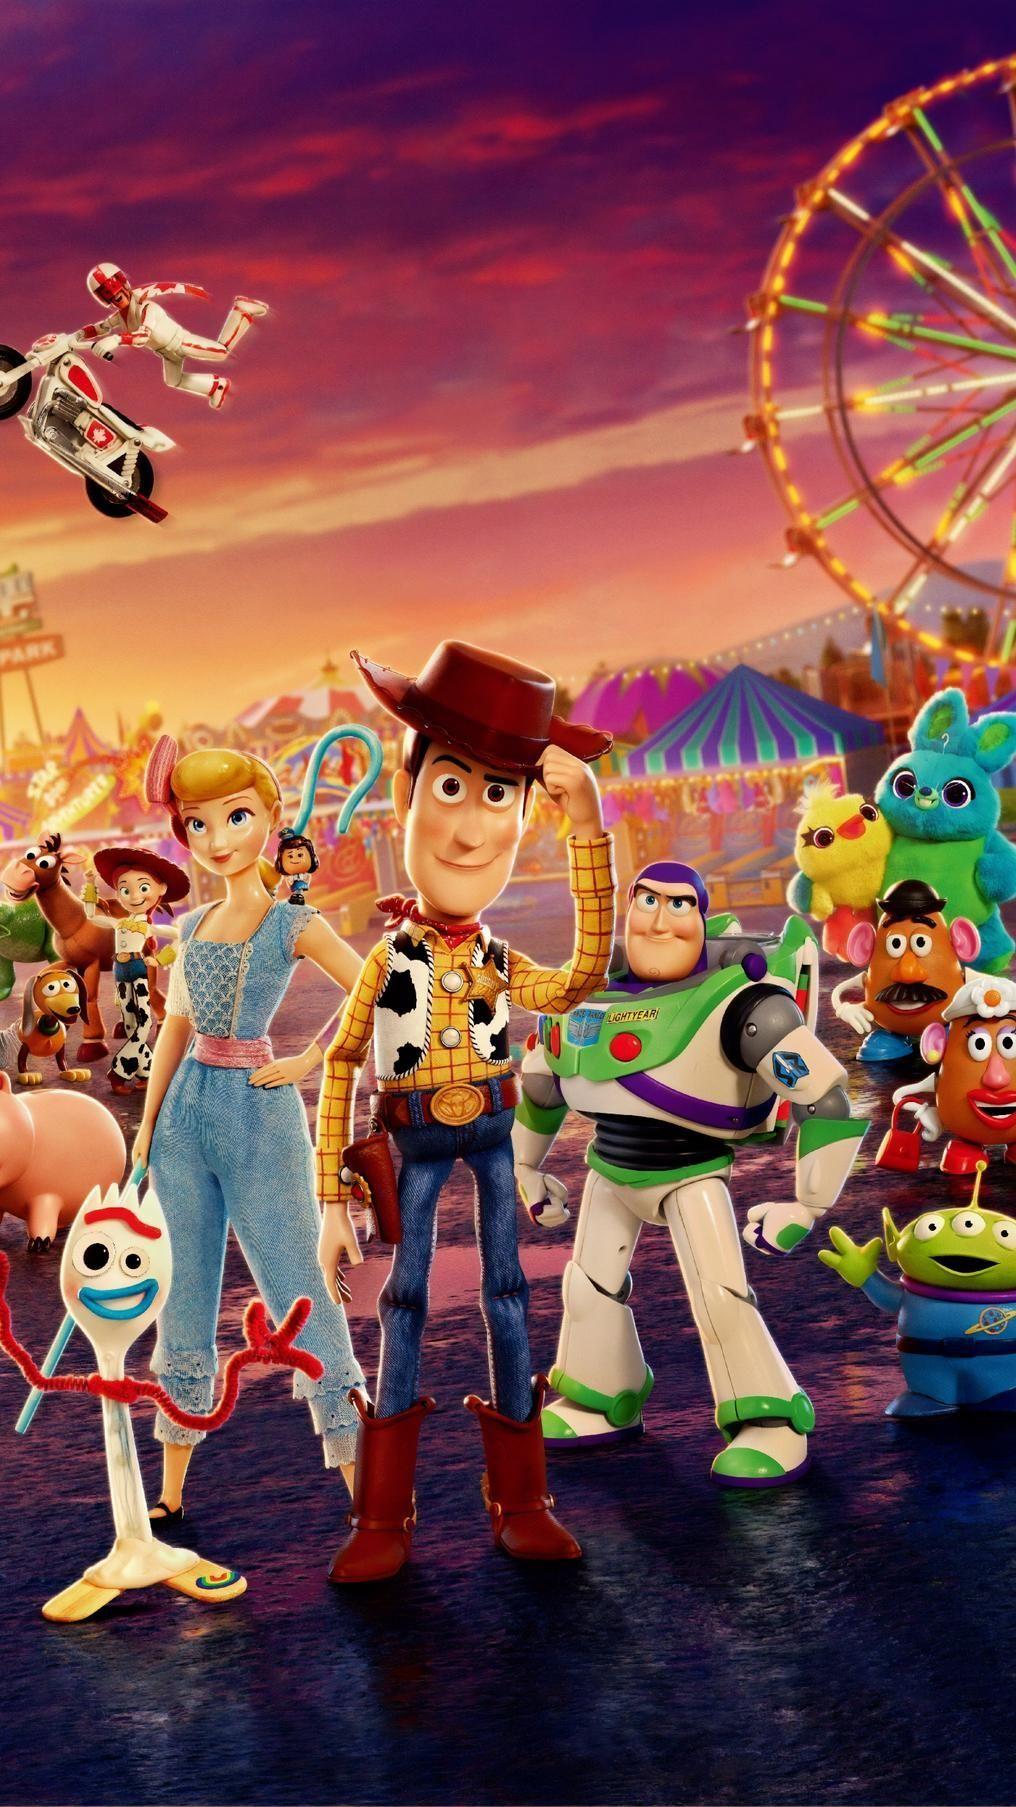 Android Full 4k Toy Story Wallpapers - Wallpaper Cave